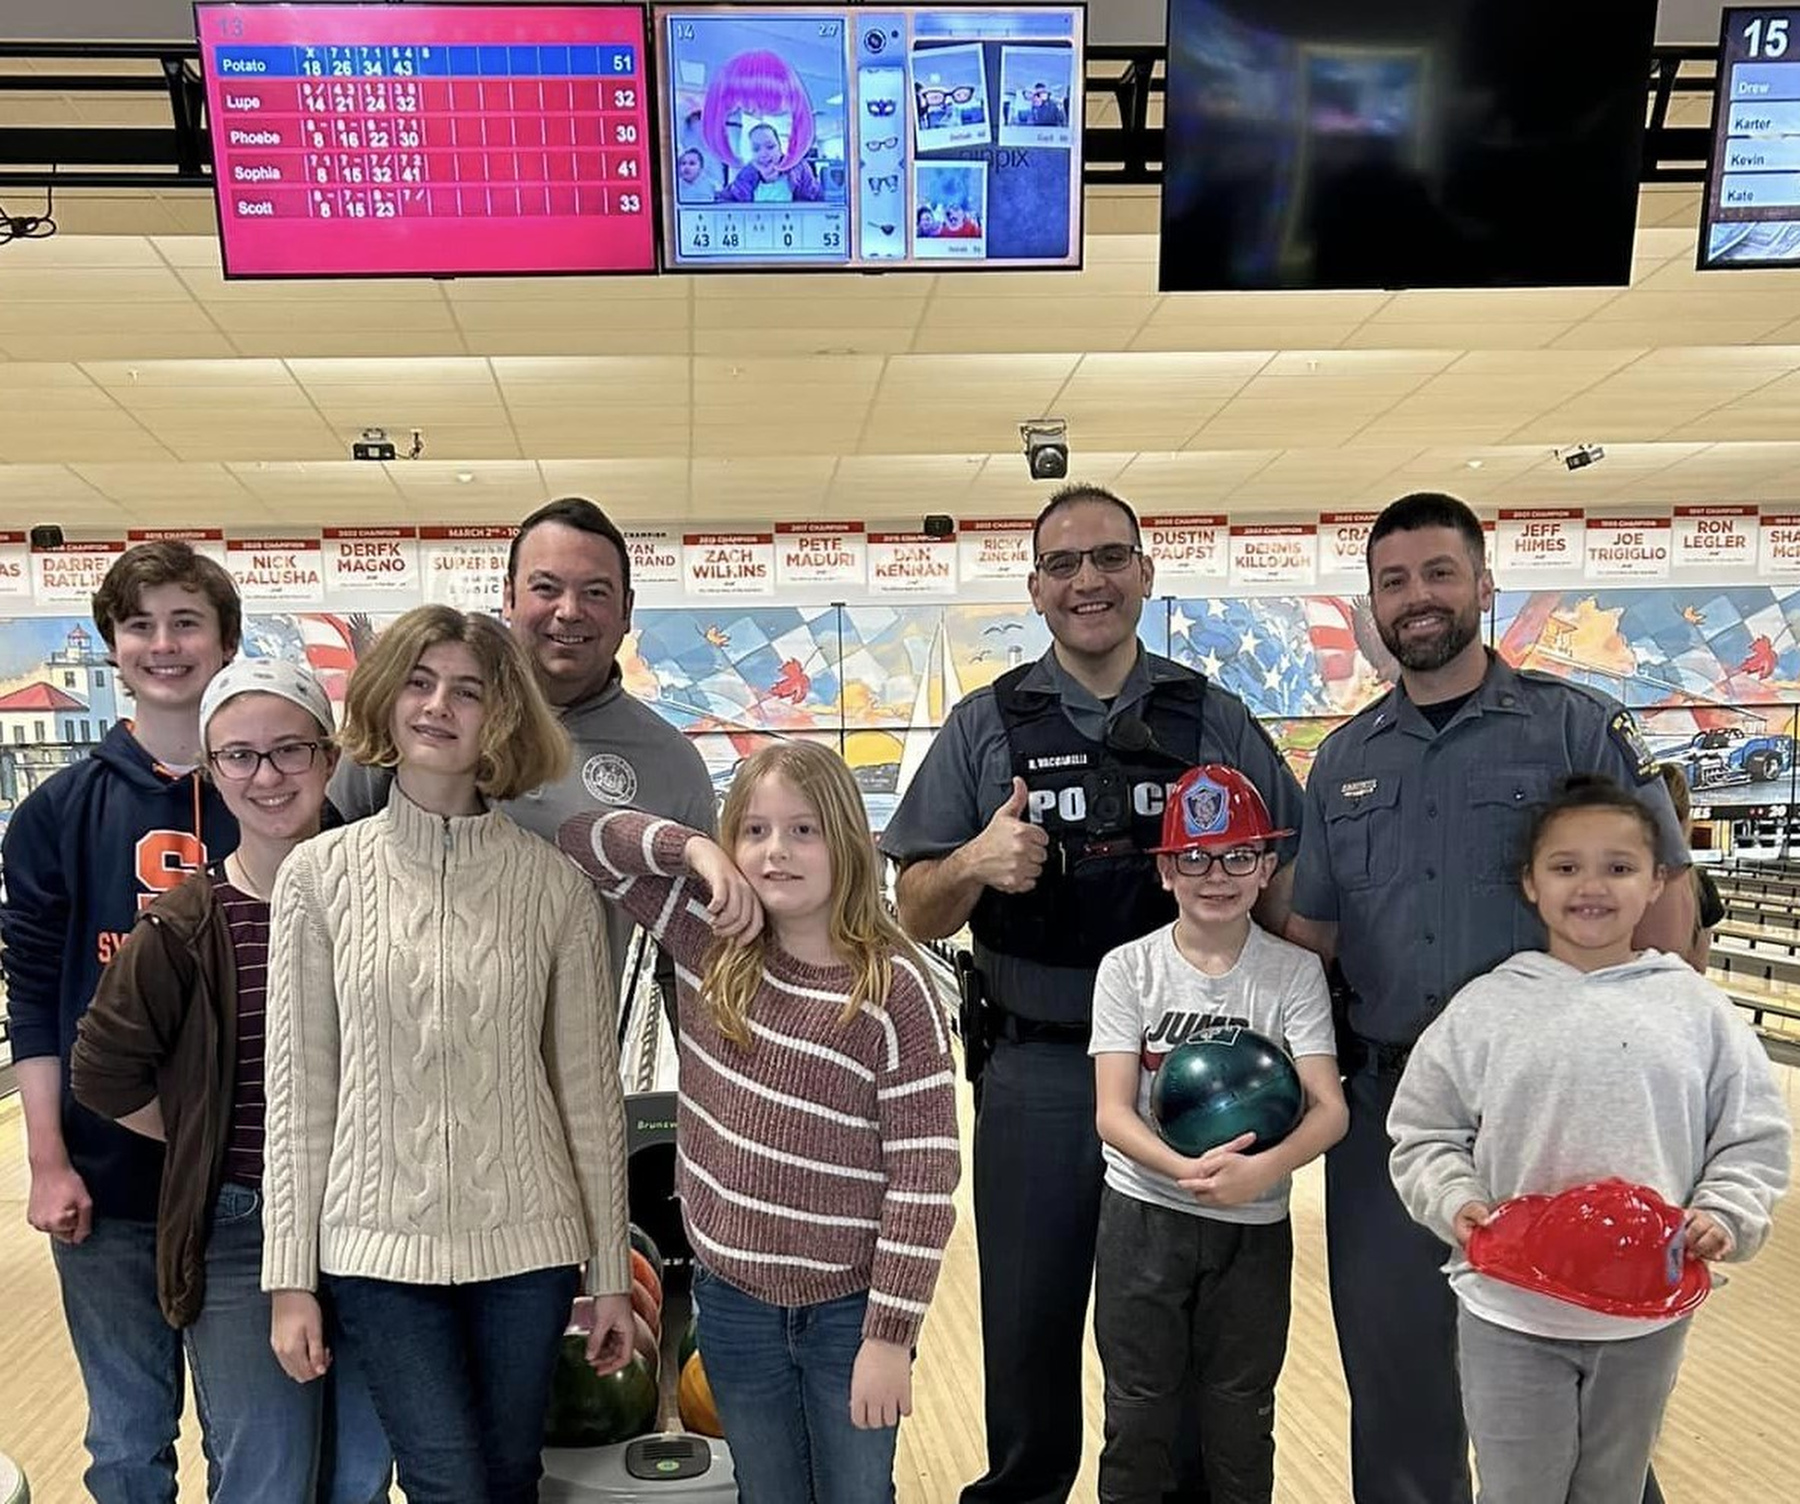 University Police Chief Scott Swayze, Officer Kevin Ermann and Lt. Rob Vaccarrelli participated with the Oswego Police Department and the Oswego Fire Department for Youth Bureau bowling at Lighthouse Lanes in Oswego. 